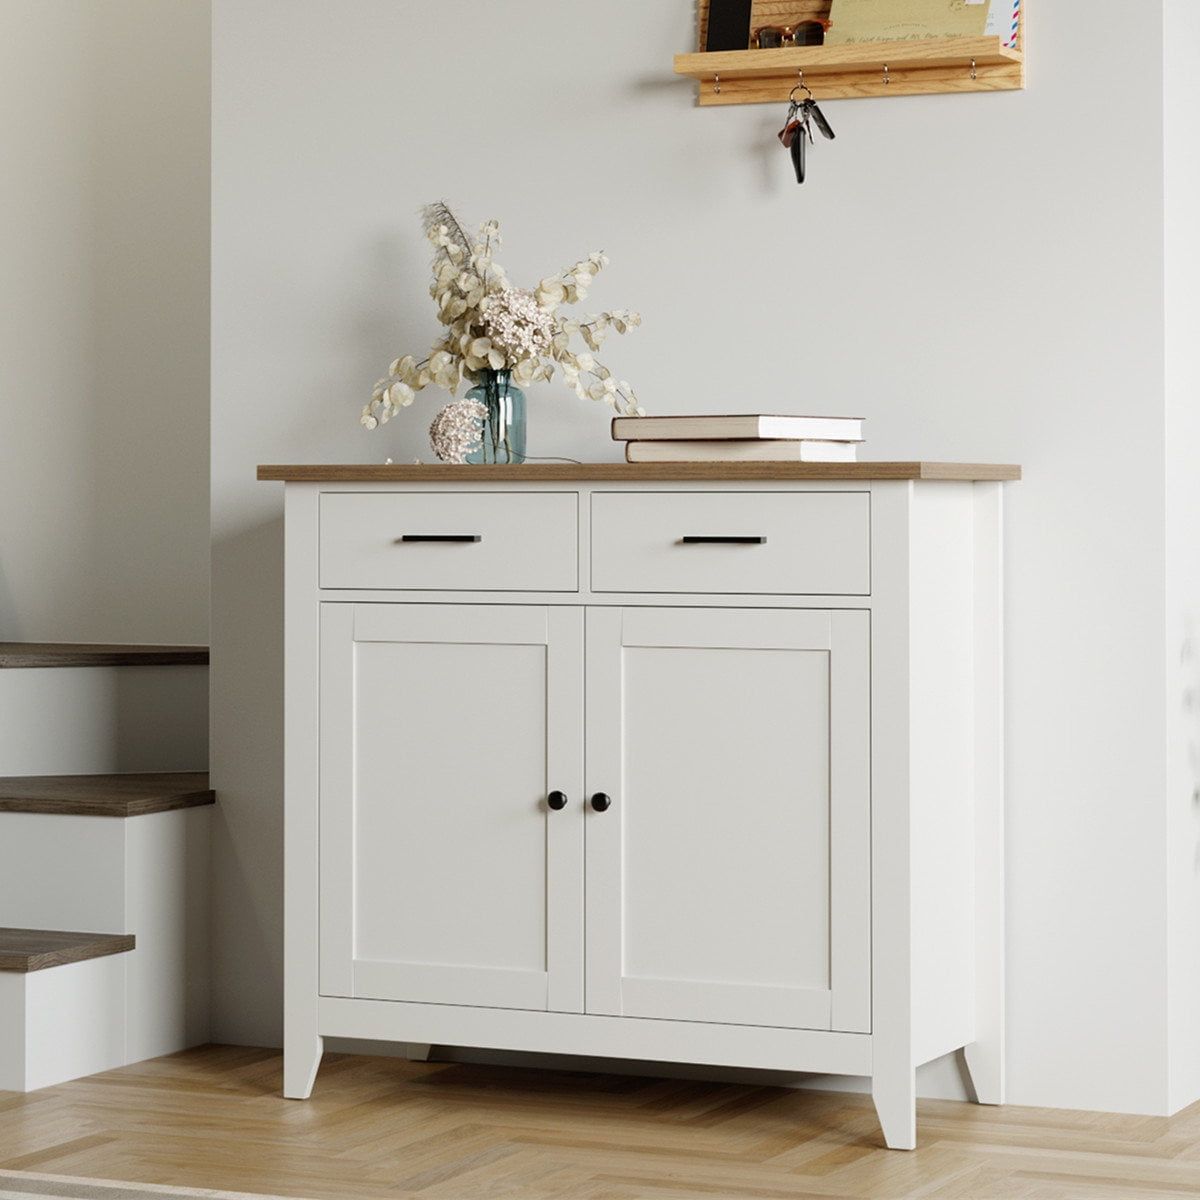 Homfa Entryway Storage Cabinet, Sideboard With 2 Drawers For Kitchen Living  Room, White – Walmart In Latest Sideboards For Entryway (View 6 of 15)